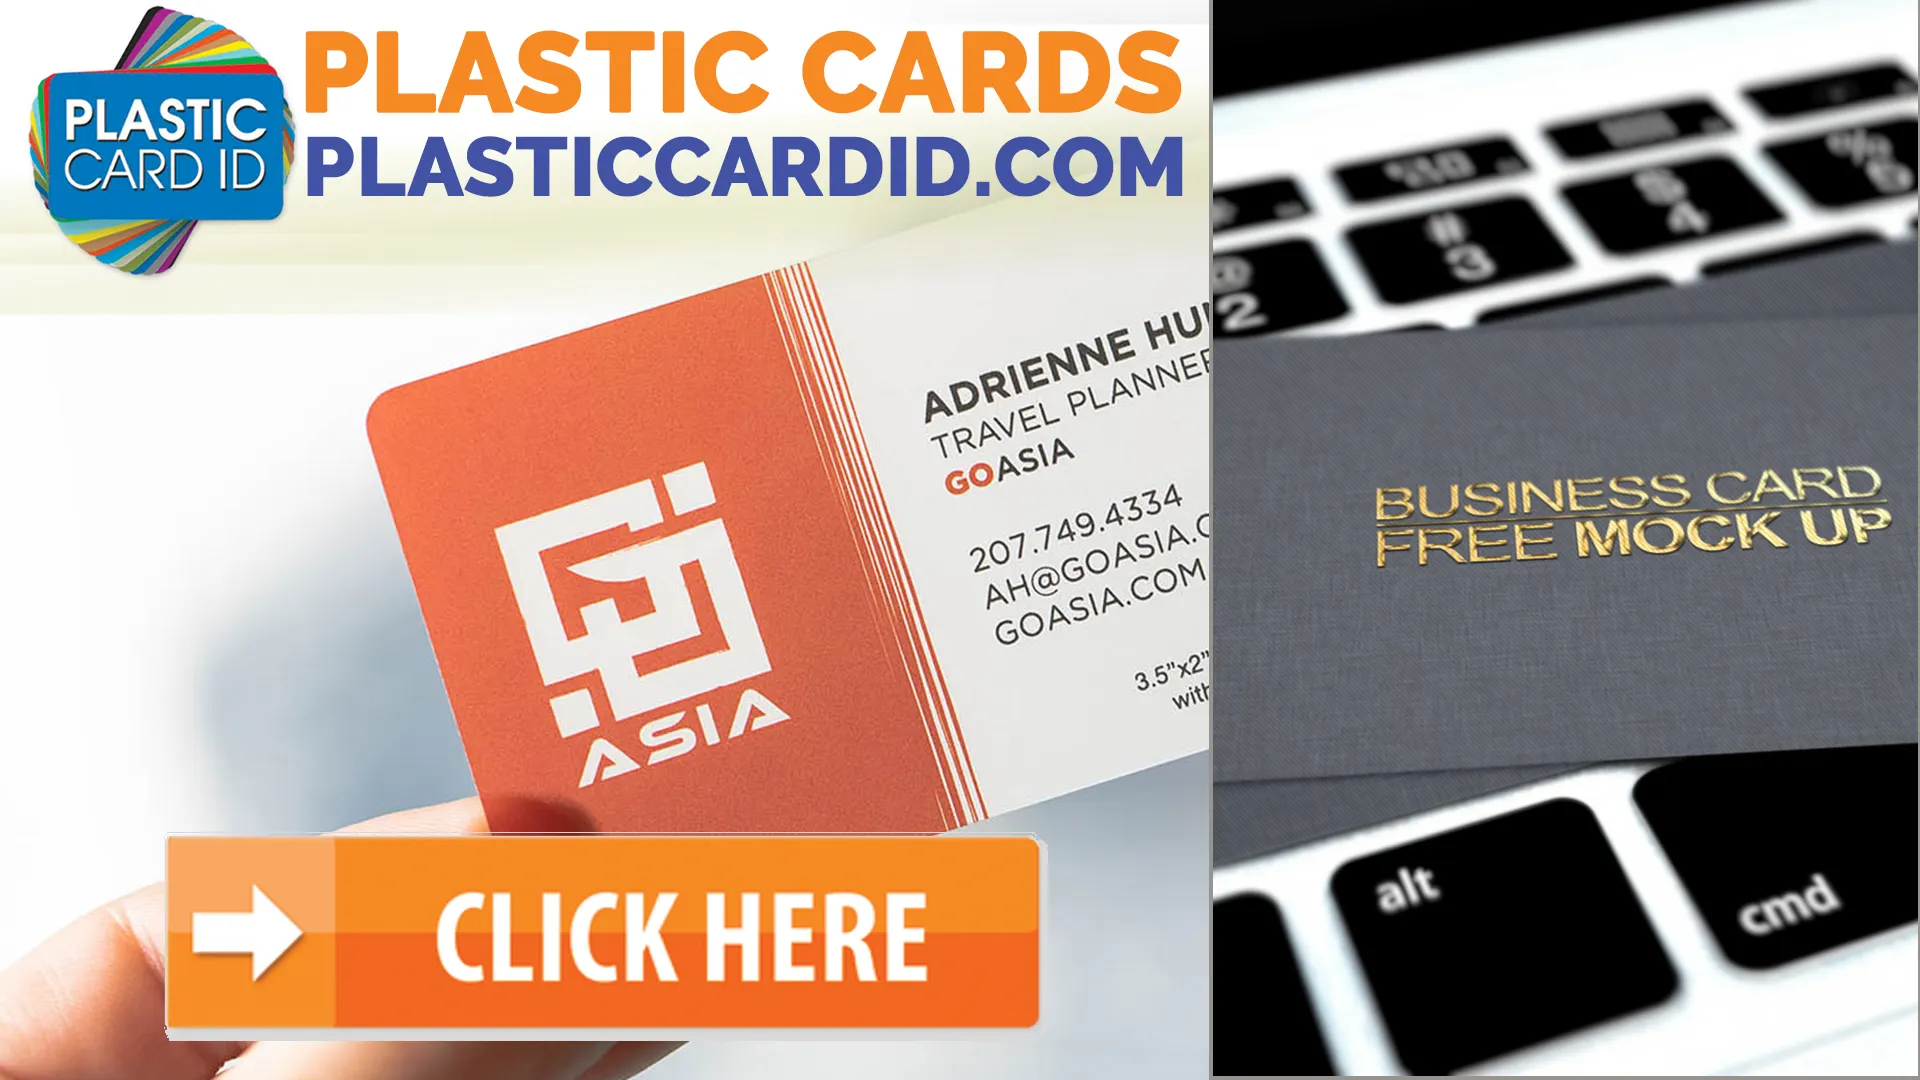 Welcome to the Ultimate Assurance in Online Plastic Card Orders